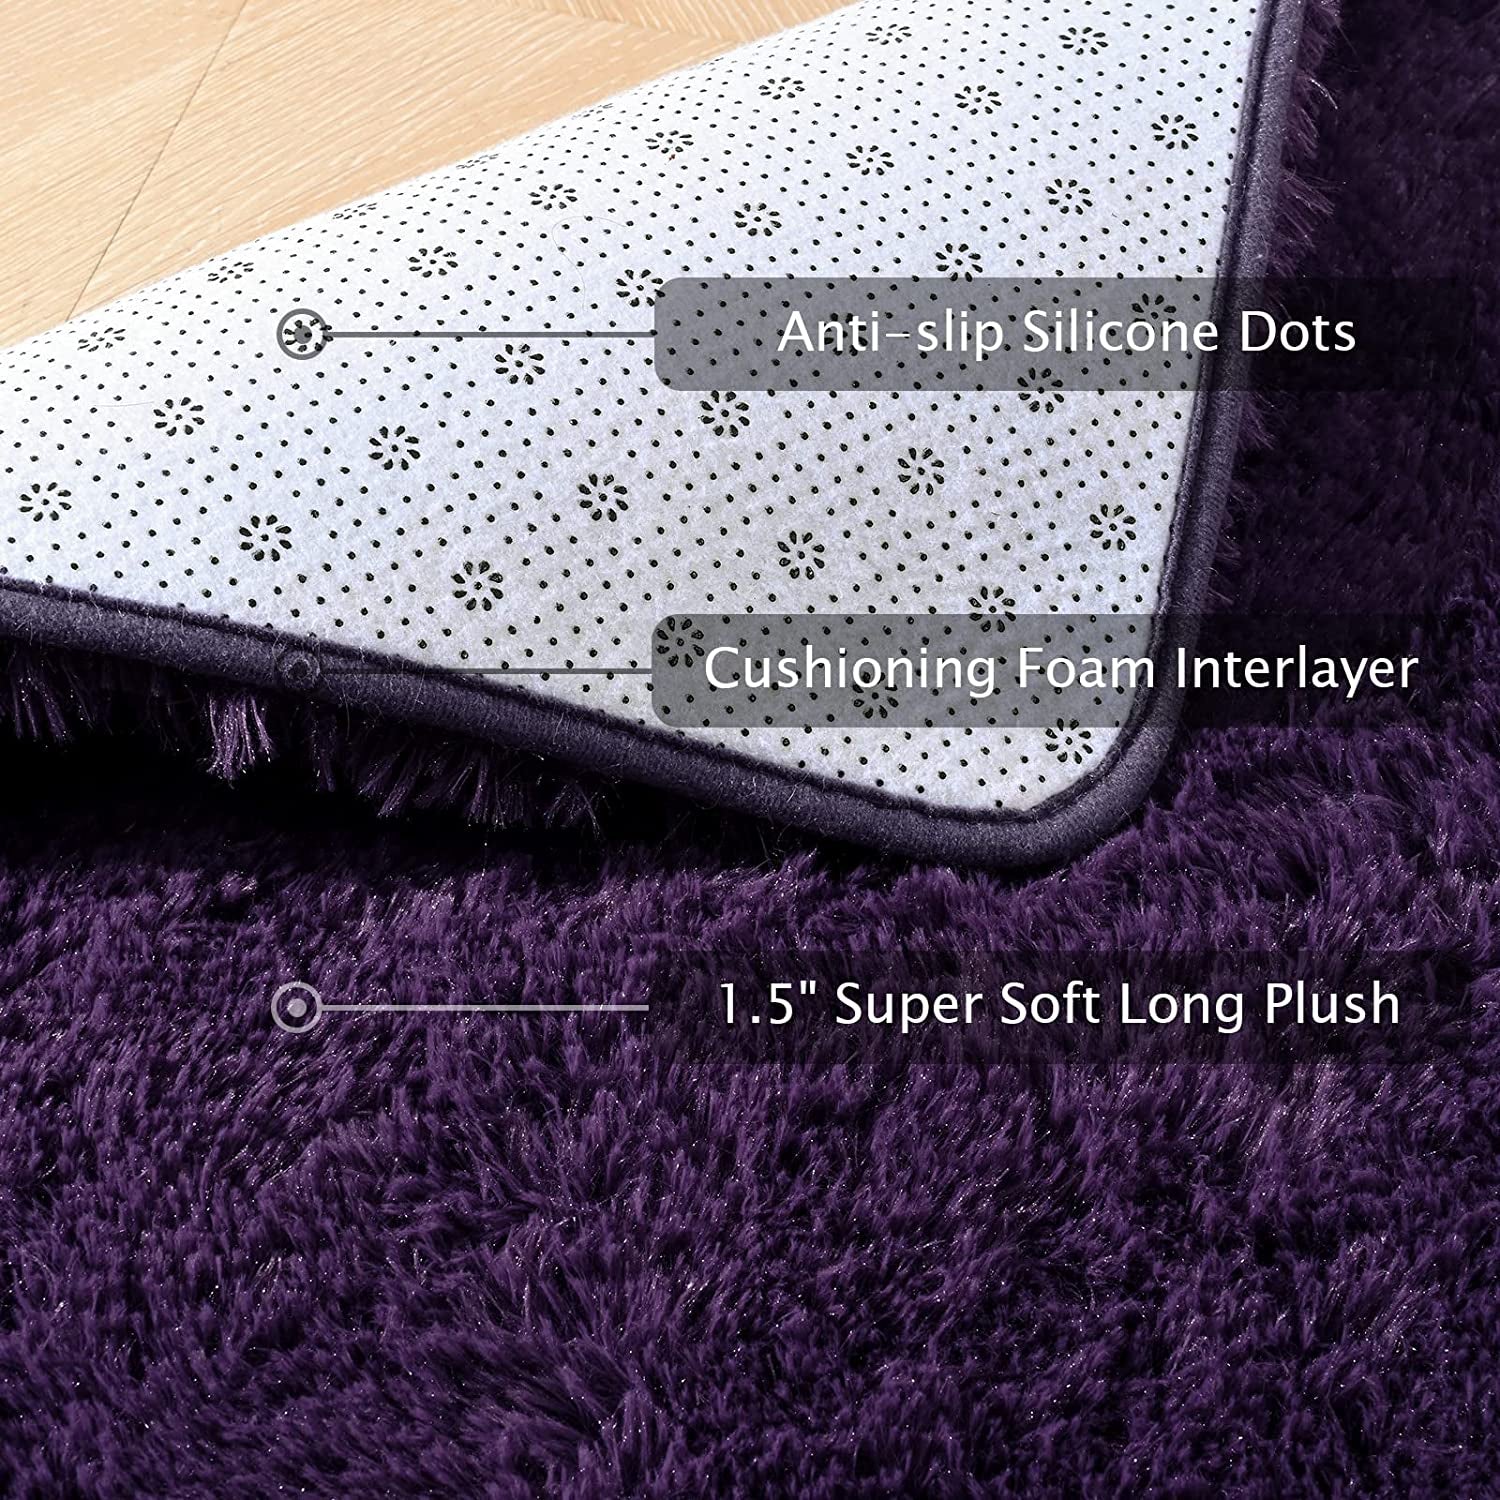 Rug for Bedroom 4X5.3 Feet Area Rug for Living Room Super Soft Shaggy Rugs for Kids Room Fluffy Fuzzy Carpets Long Plush Bedside Rug Nursery Christmas Home Decoration for Boys Girls, Purple